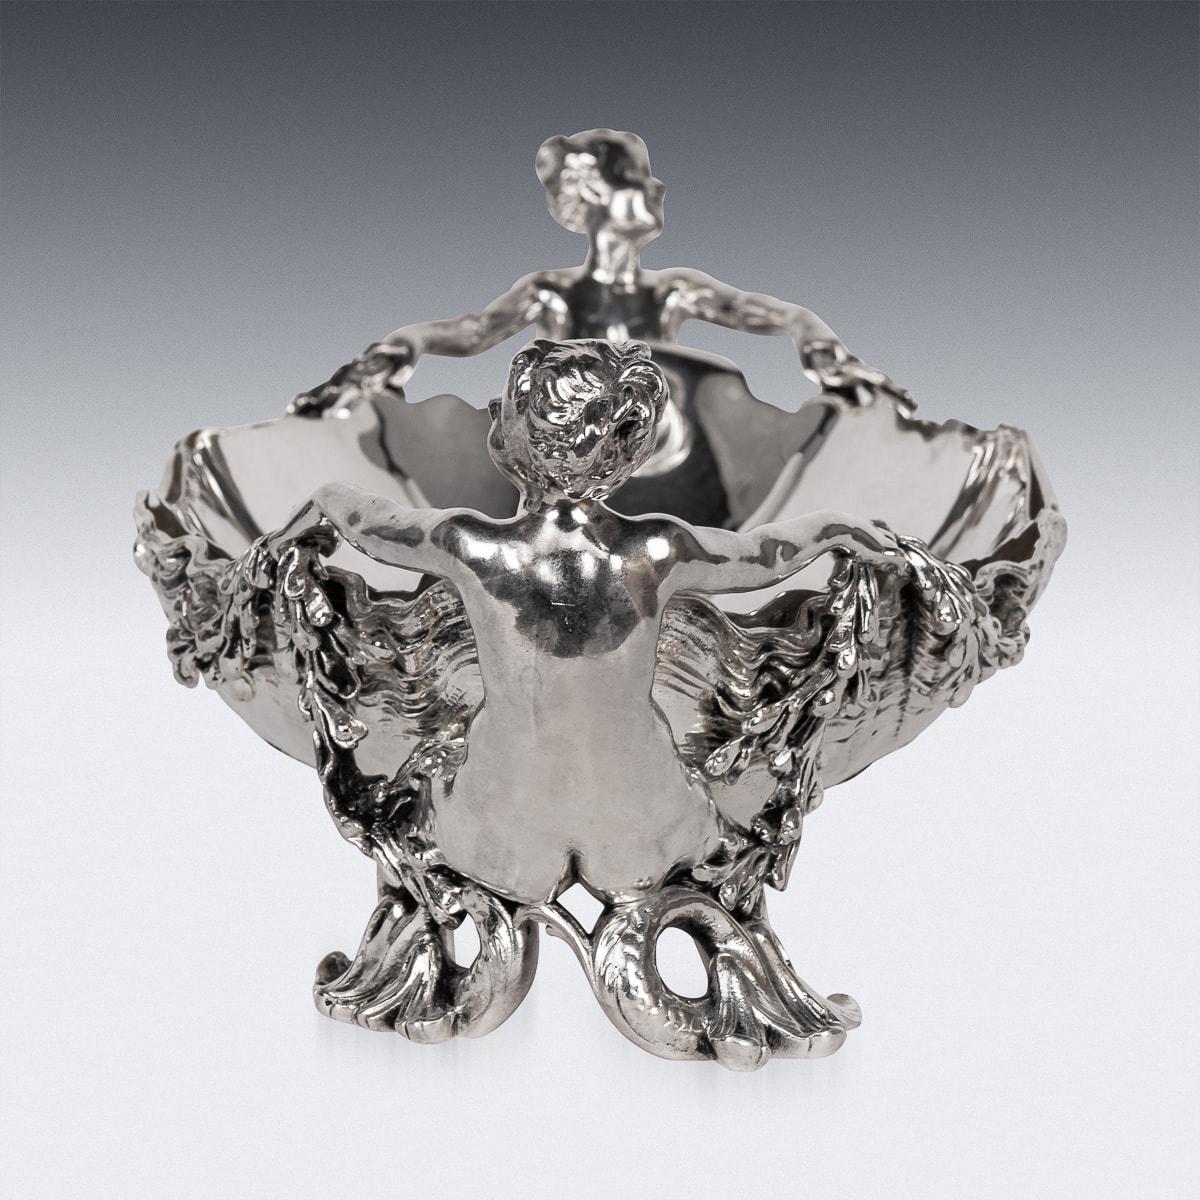 Other Antique 19th Century French Silver Plated Figural Centrepiece, Christofle c.1880 For Sale